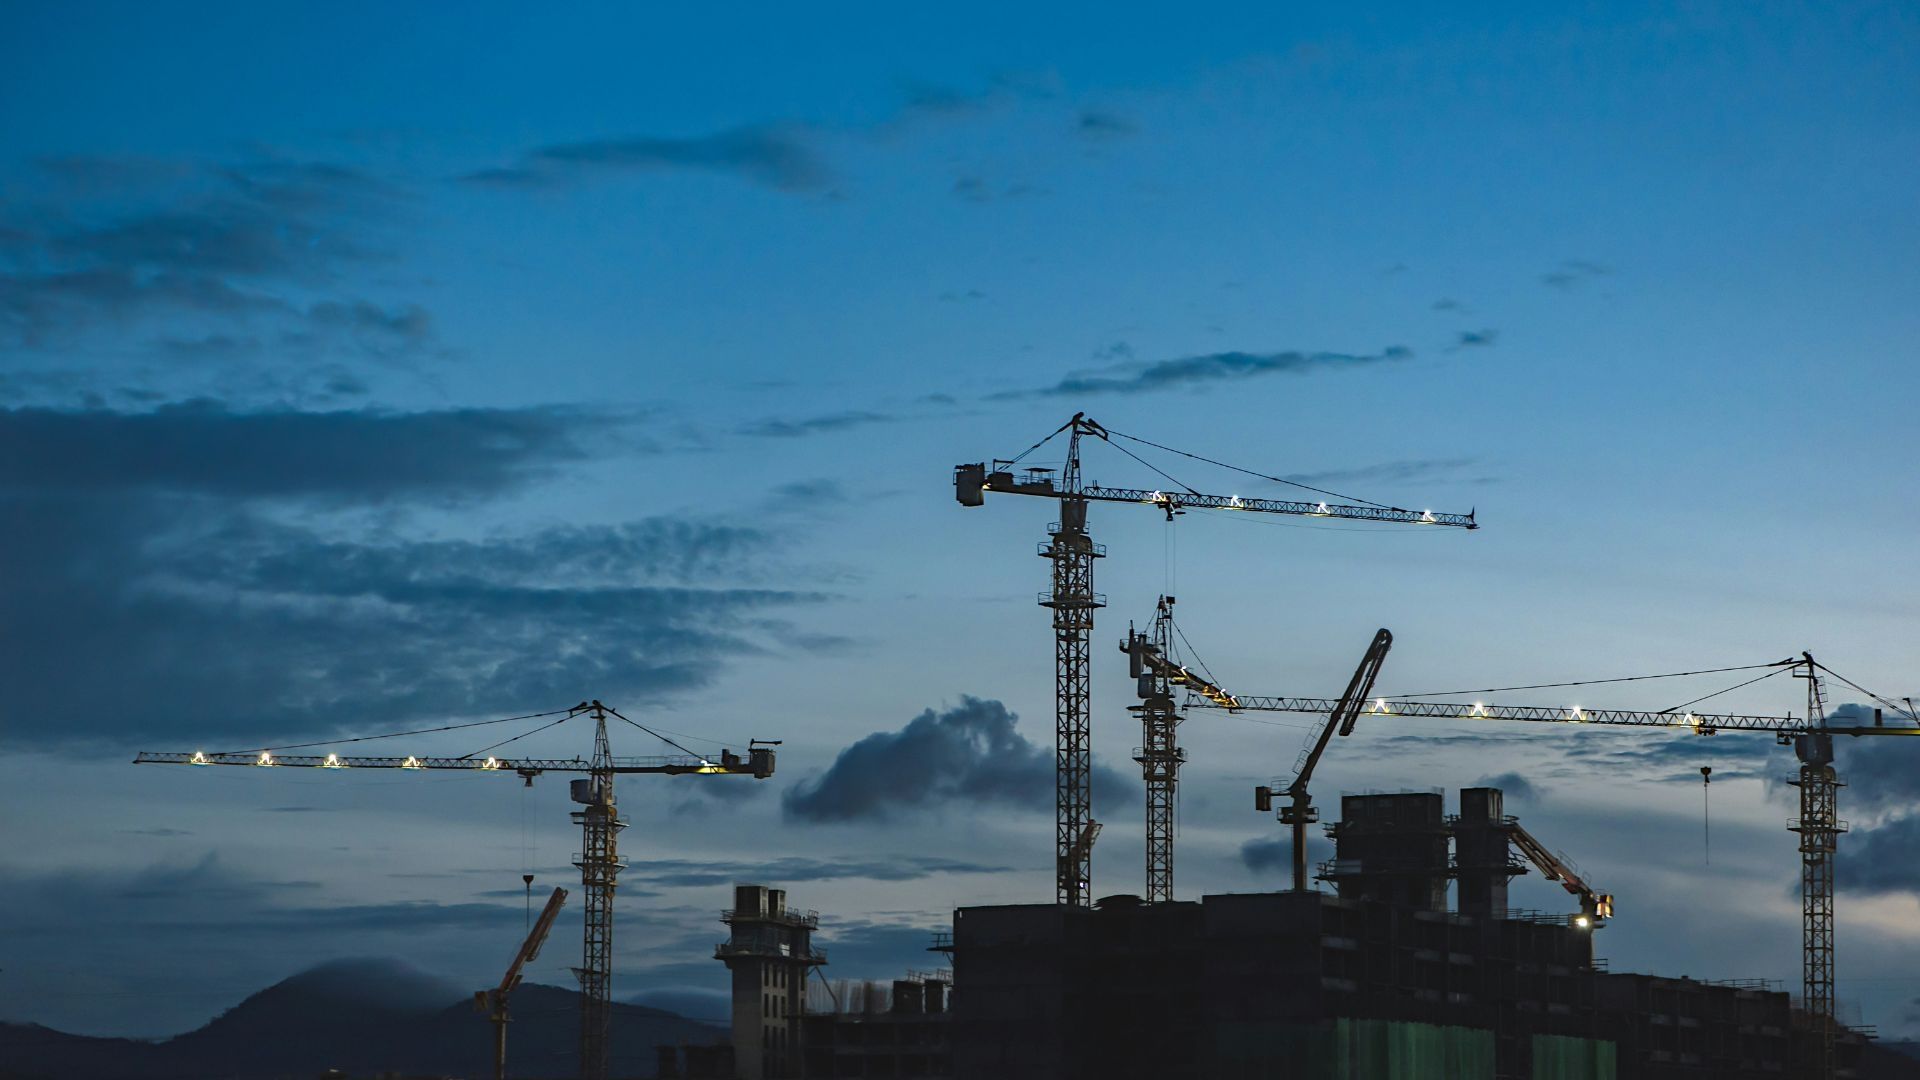 Cranes in the skyline on a building site